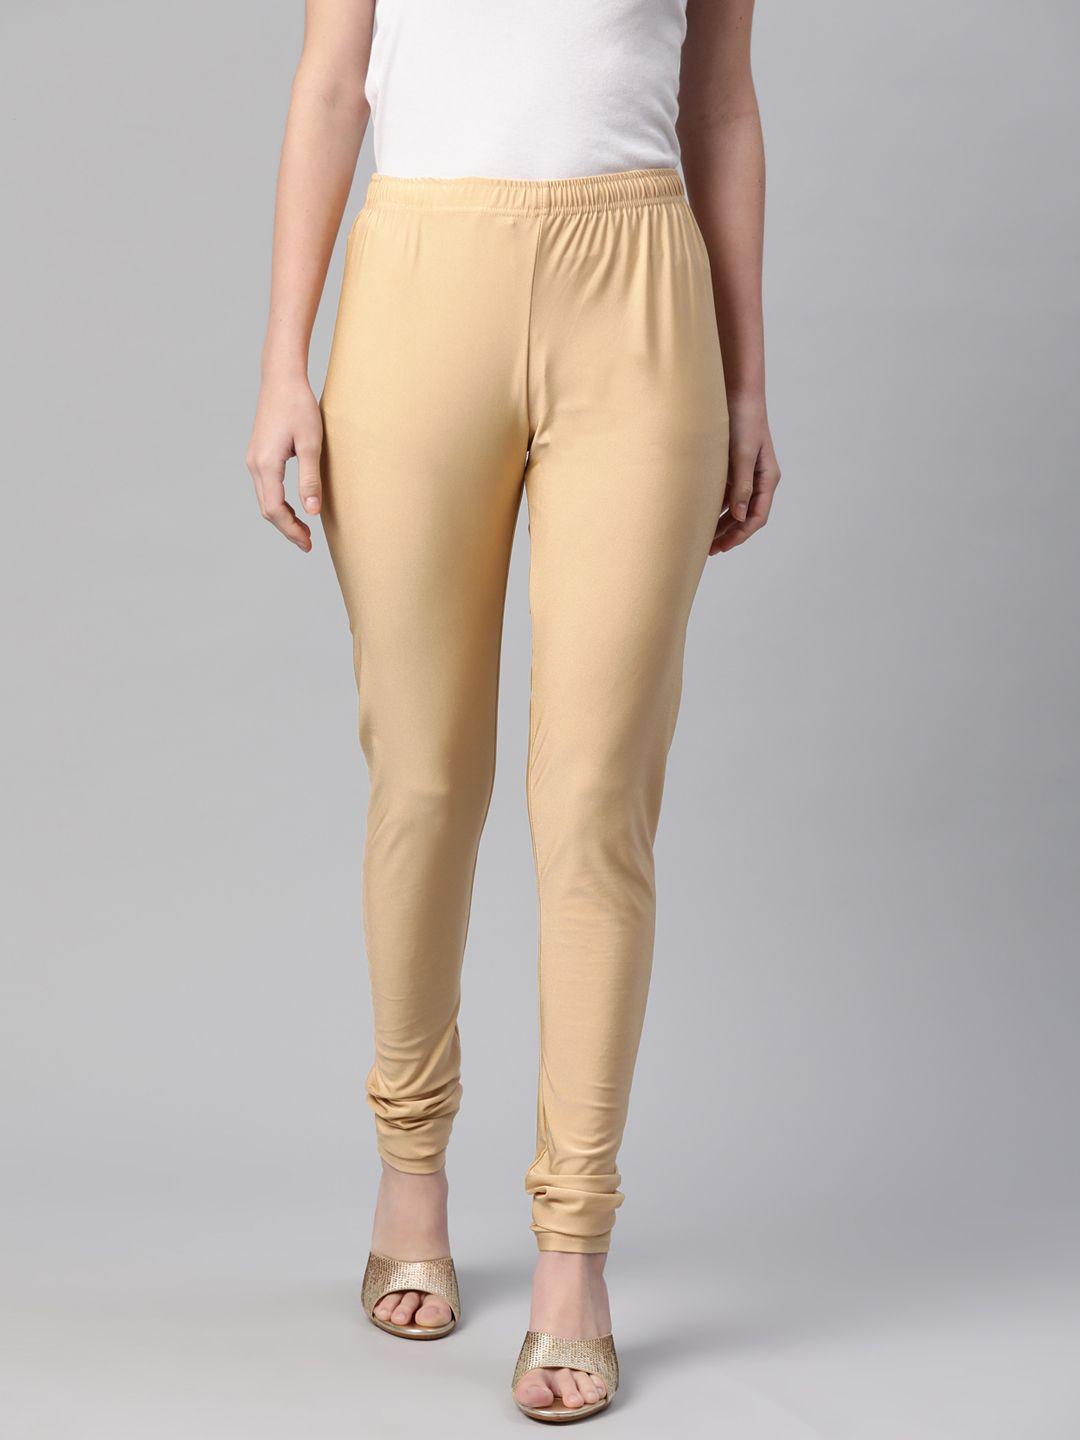 rangriti women gold-toned solid knitted polyester slim fit mid-rise churidar